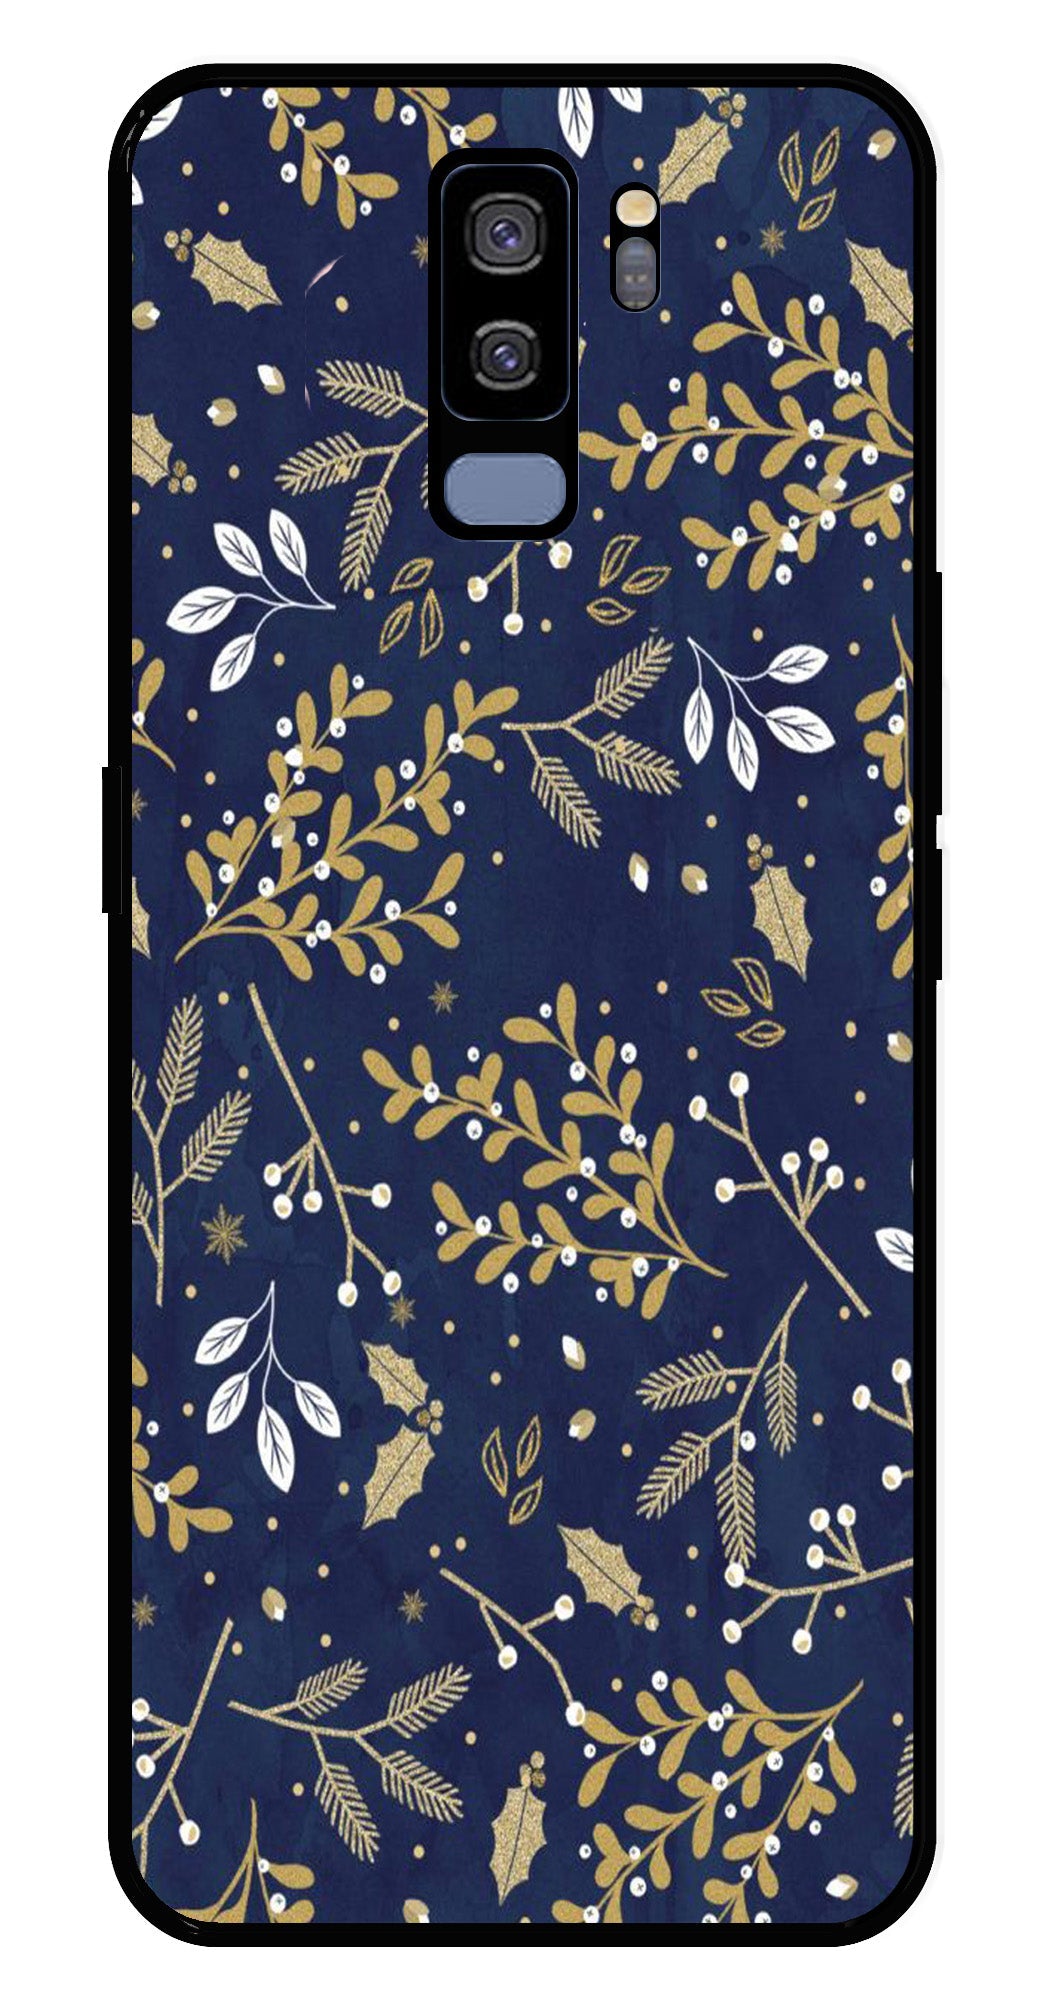 Floral Pattern  Metal Mobile Case for Samsung Galaxy S9 Plus   (Design No -52)